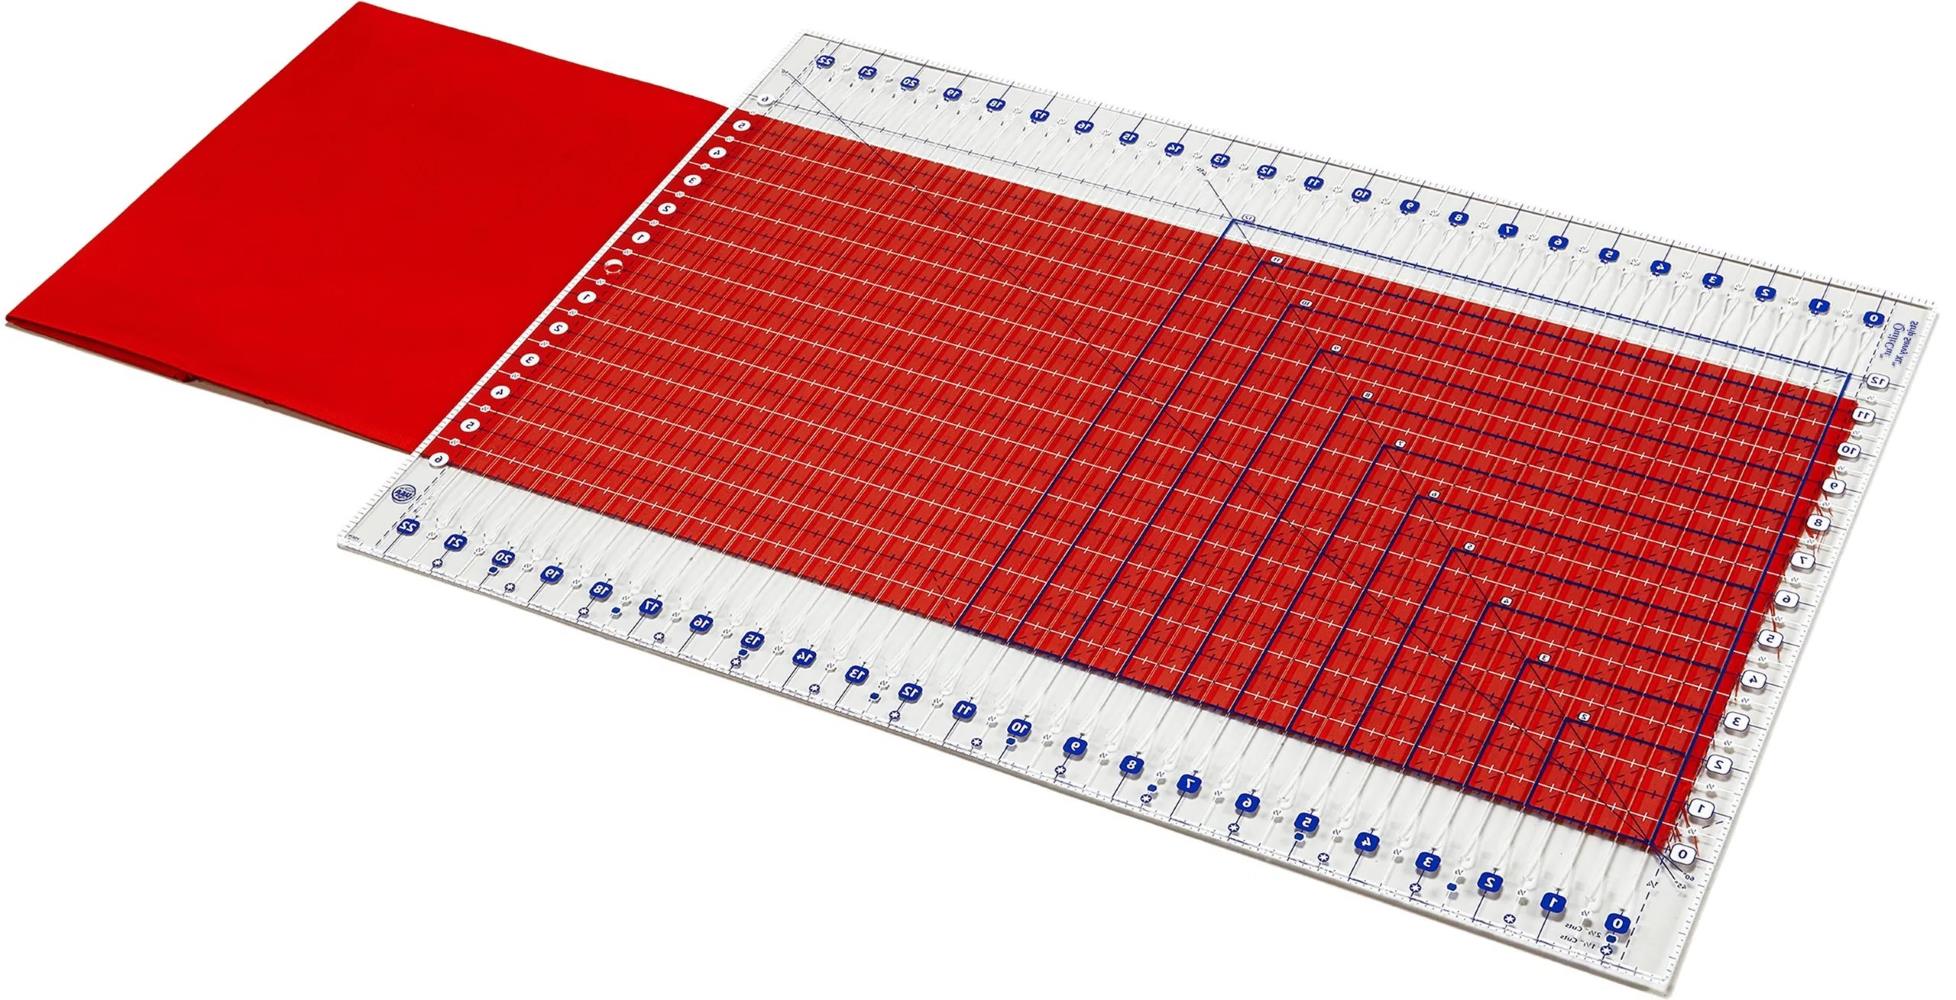 Quilting Ruler Review: A Must-Have Tool for Him